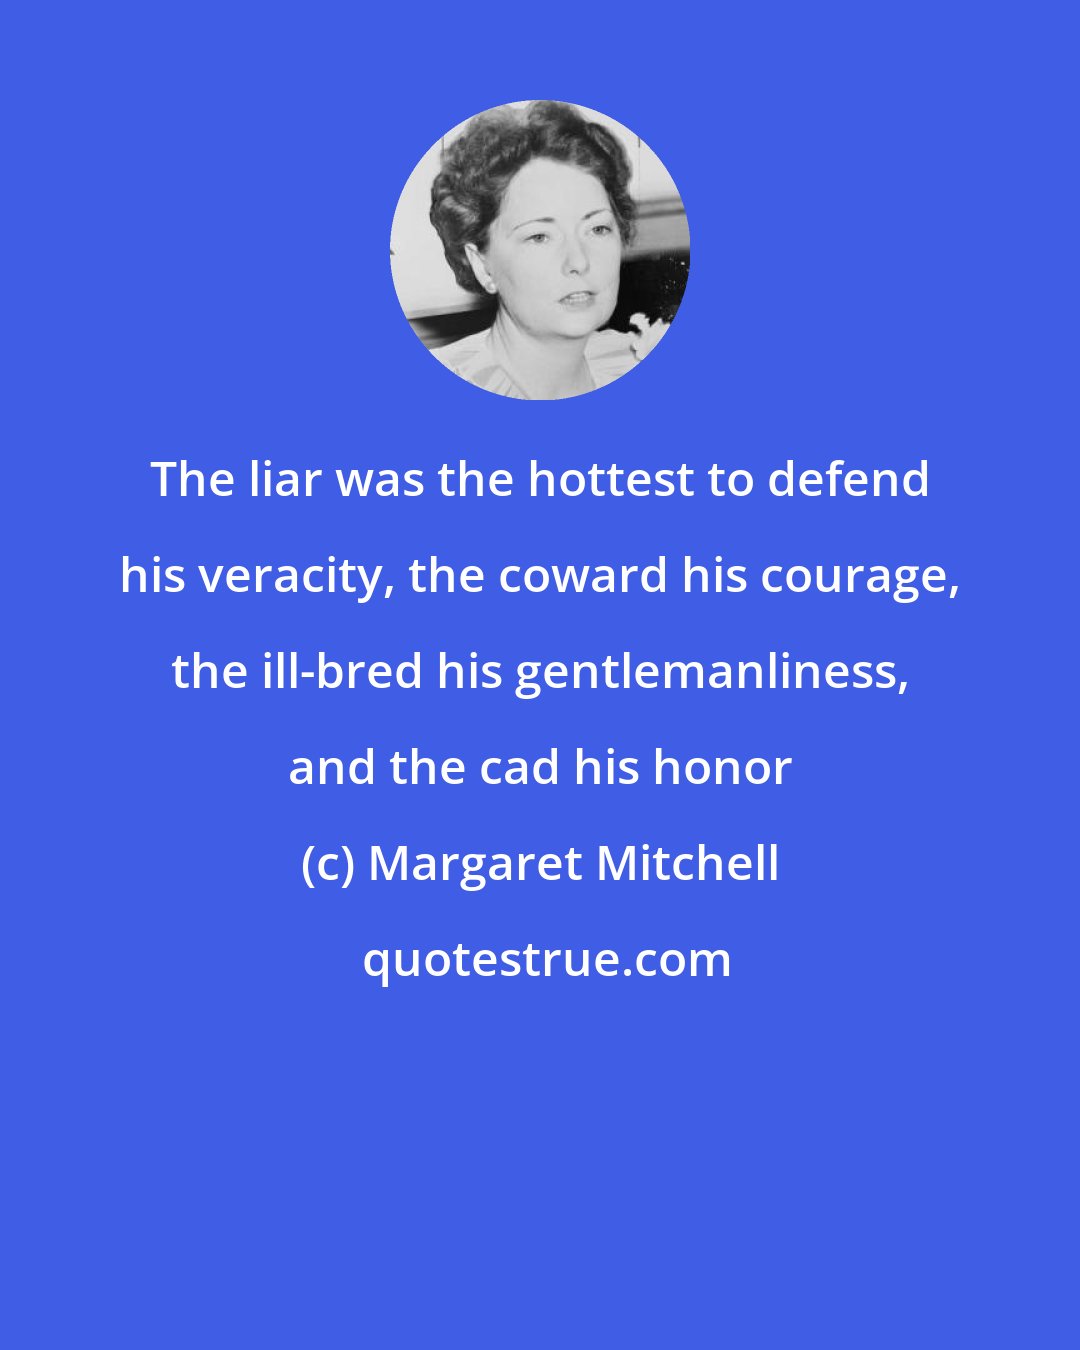 Margaret Mitchell: The liar was the hottest to defend his veracity, the coward his courage, the ill-bred his gentlemanliness, and the cad his honor